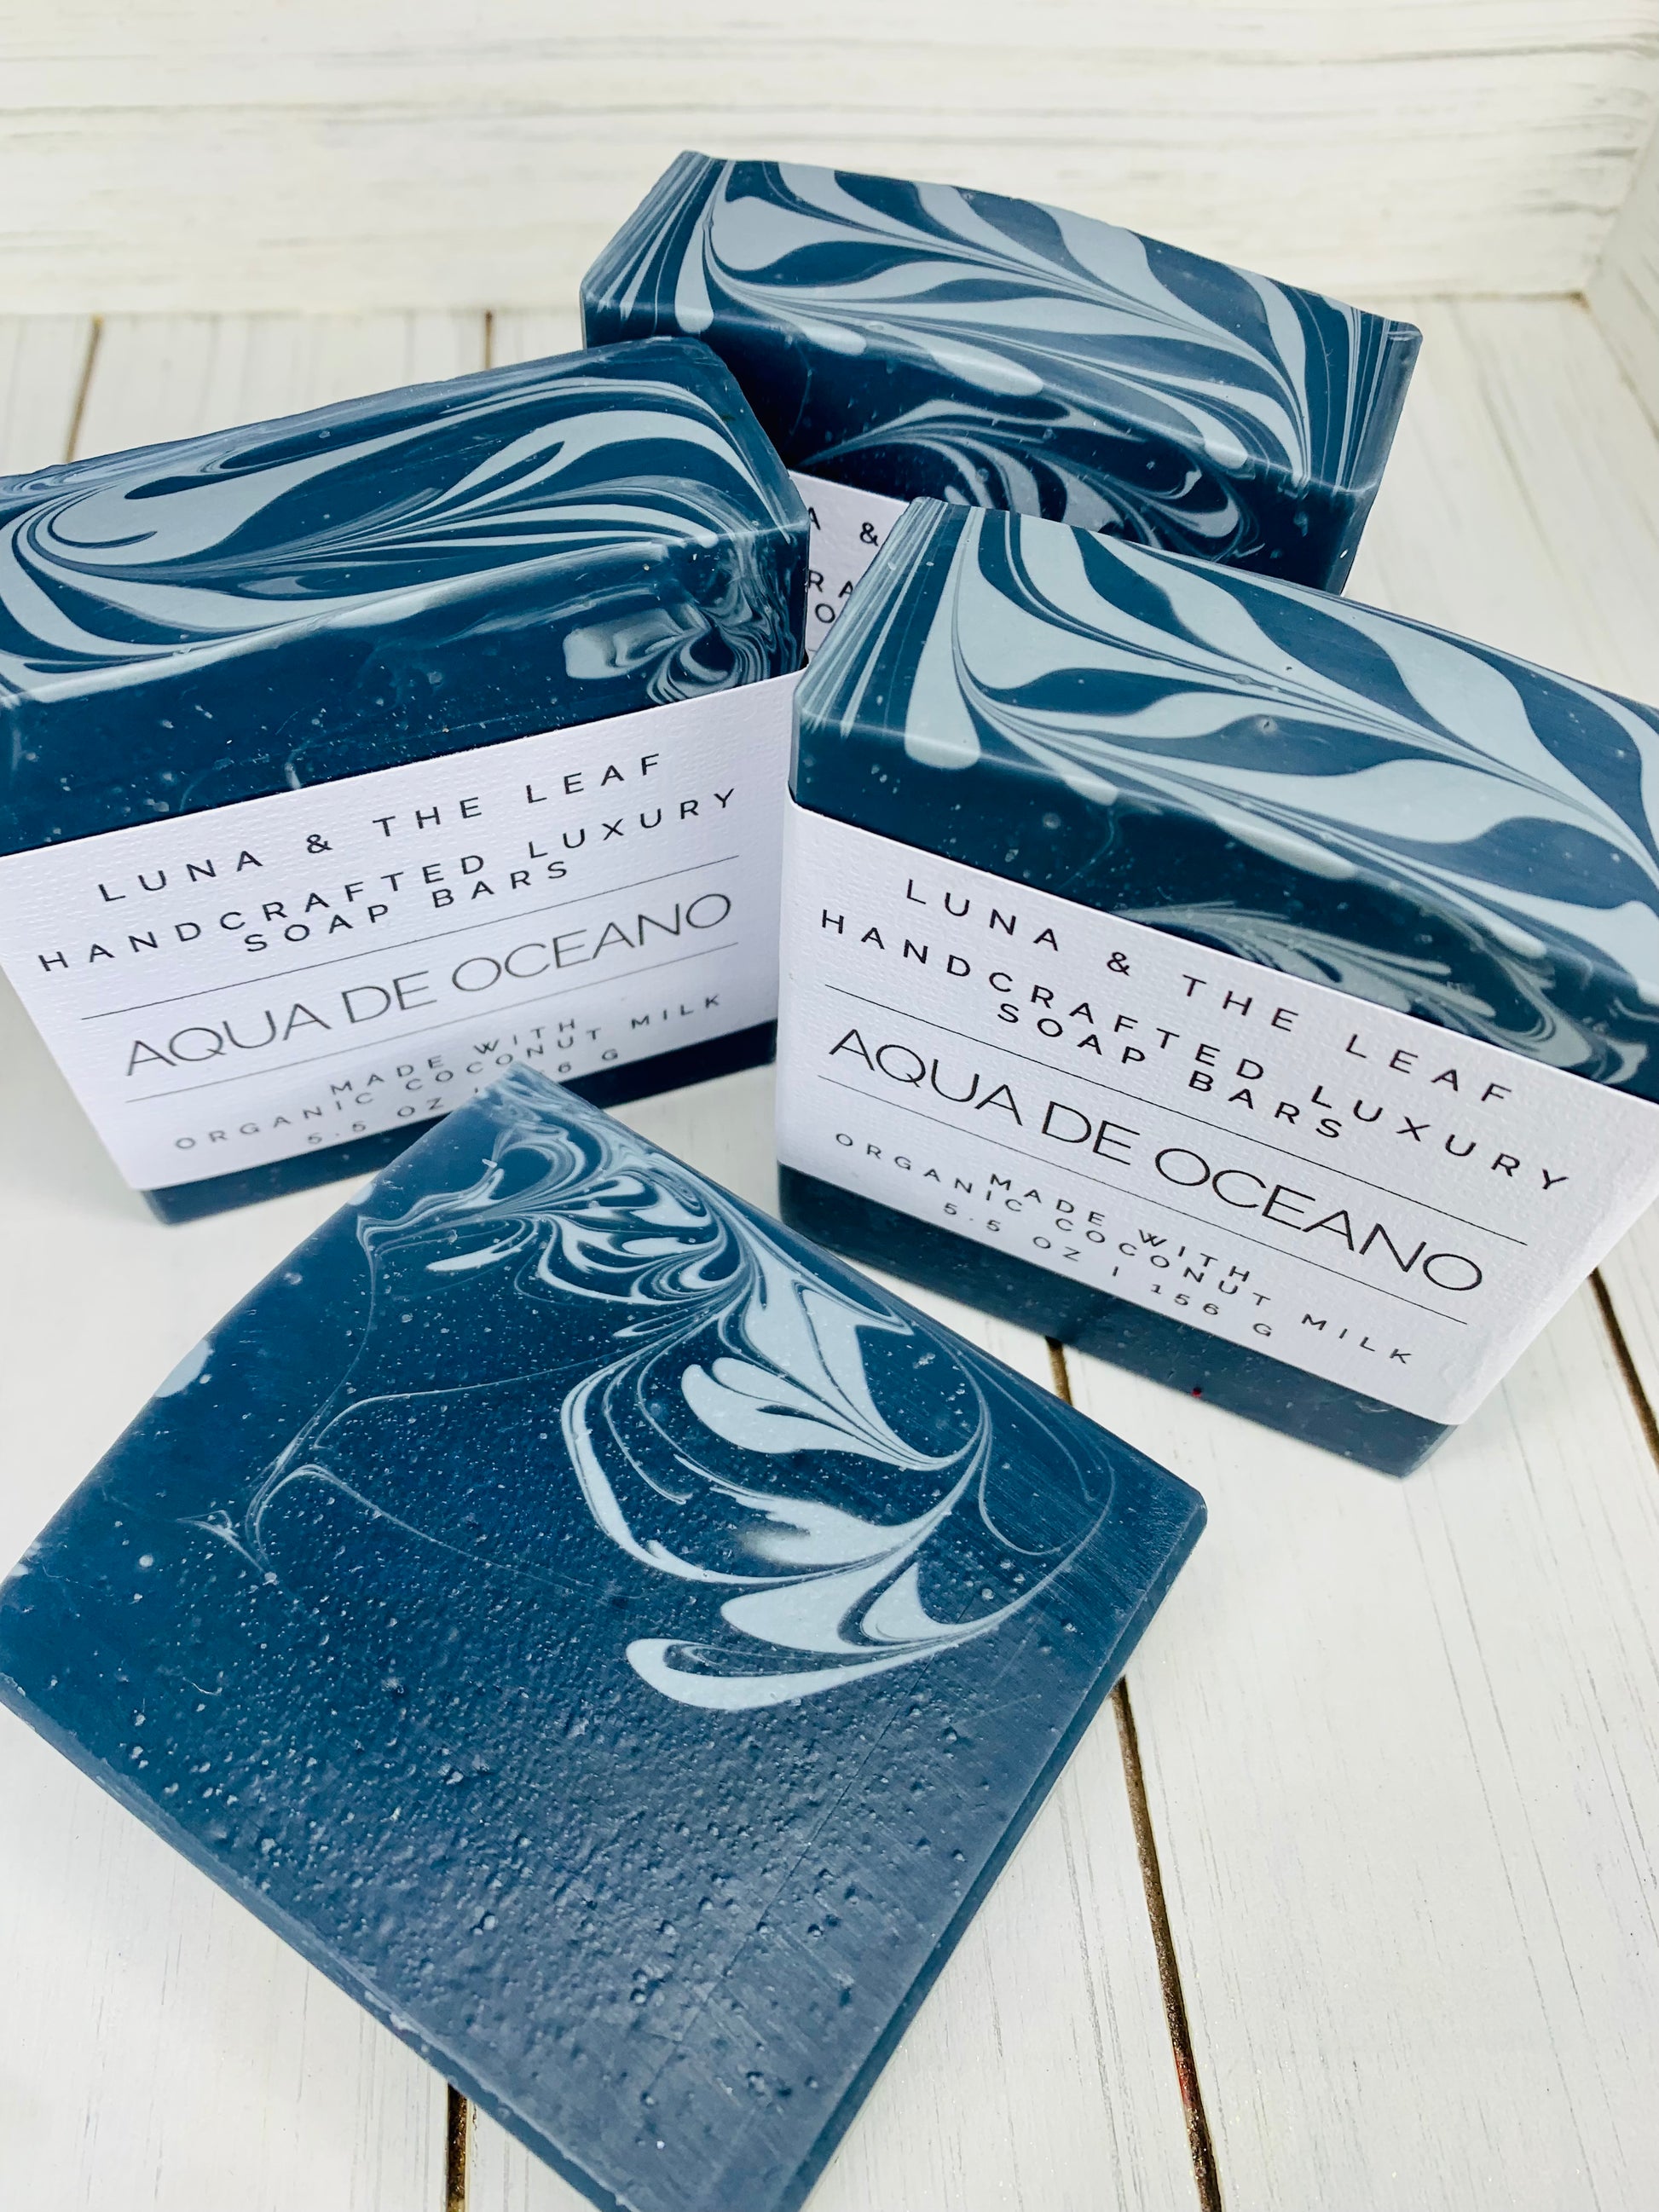 4 navy blue soap bars with a white swirl on one side and navy blue and white chevron pattern on top. Three are standing up with white cigar band labels that say Aqua De Oceano and one is laying down in front with no label. They are on a white wooden background.